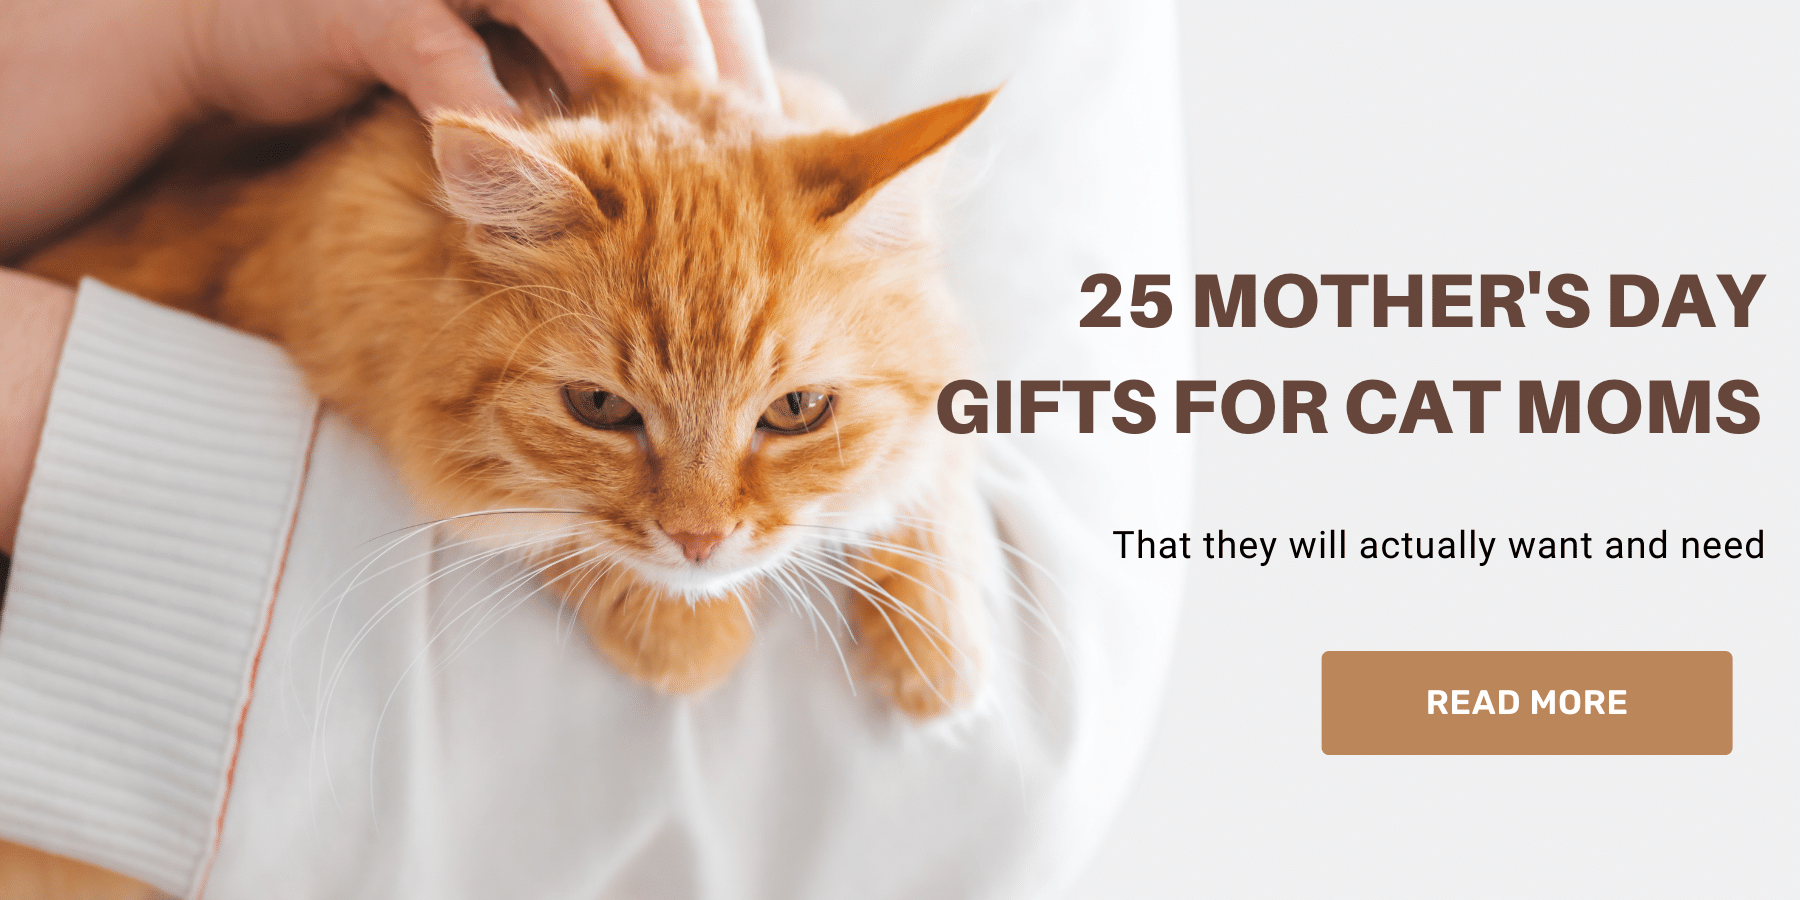 25 Mother's Day Gifts for Cat Moms That They Actually Want And Need